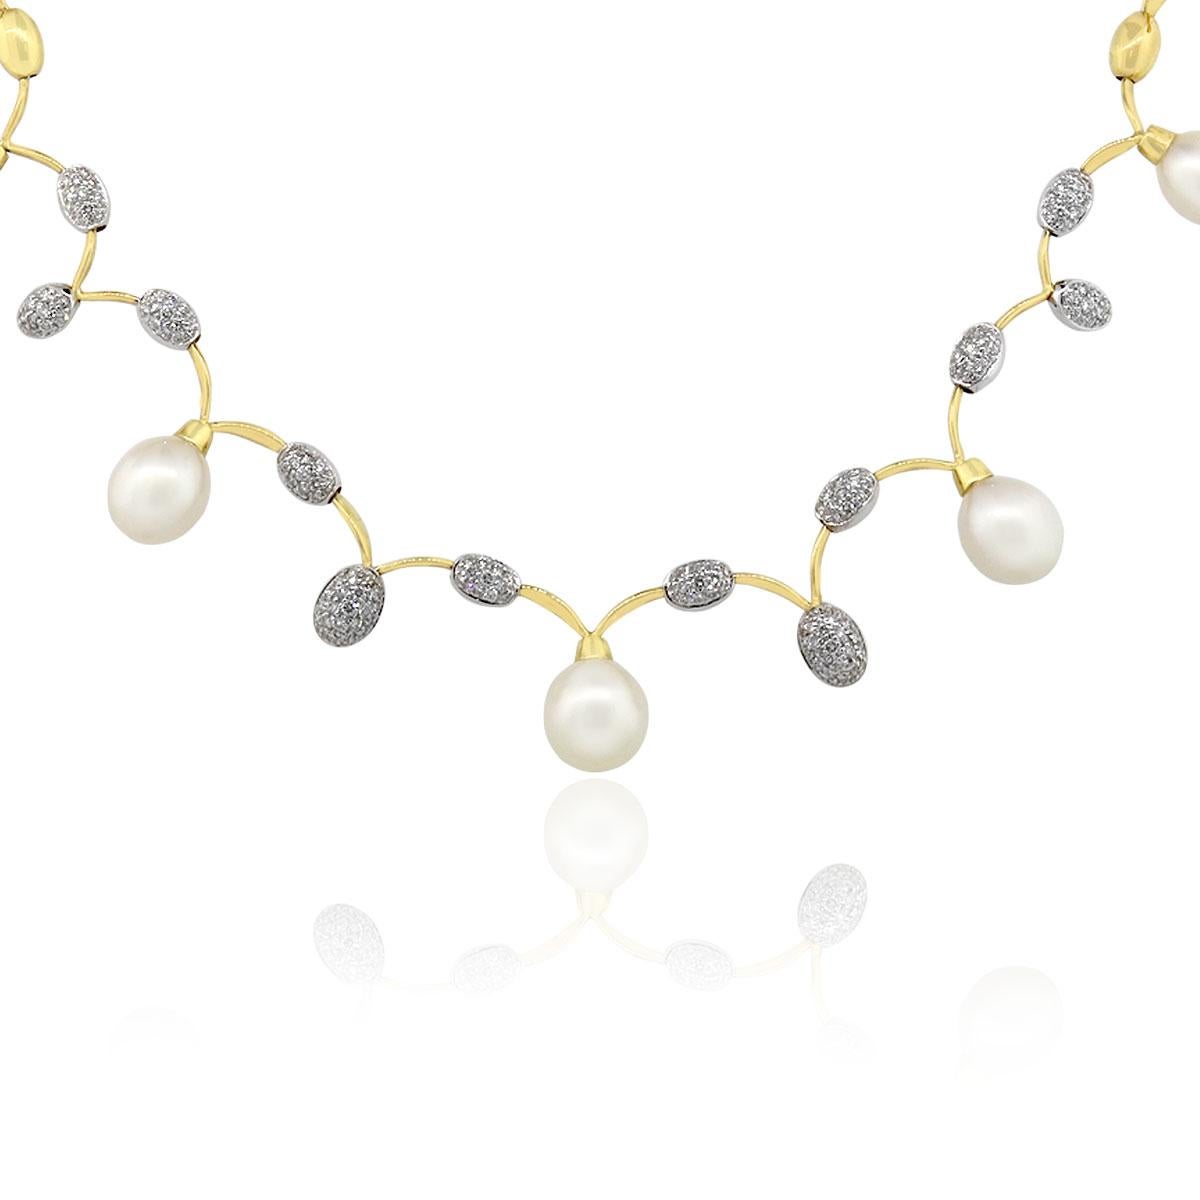 Gemstone Details: Pearls, 9mm to 10mm.
Diamond Details: Diamonds are G/H in color and VS in clarity
Necklace Measurements: 18